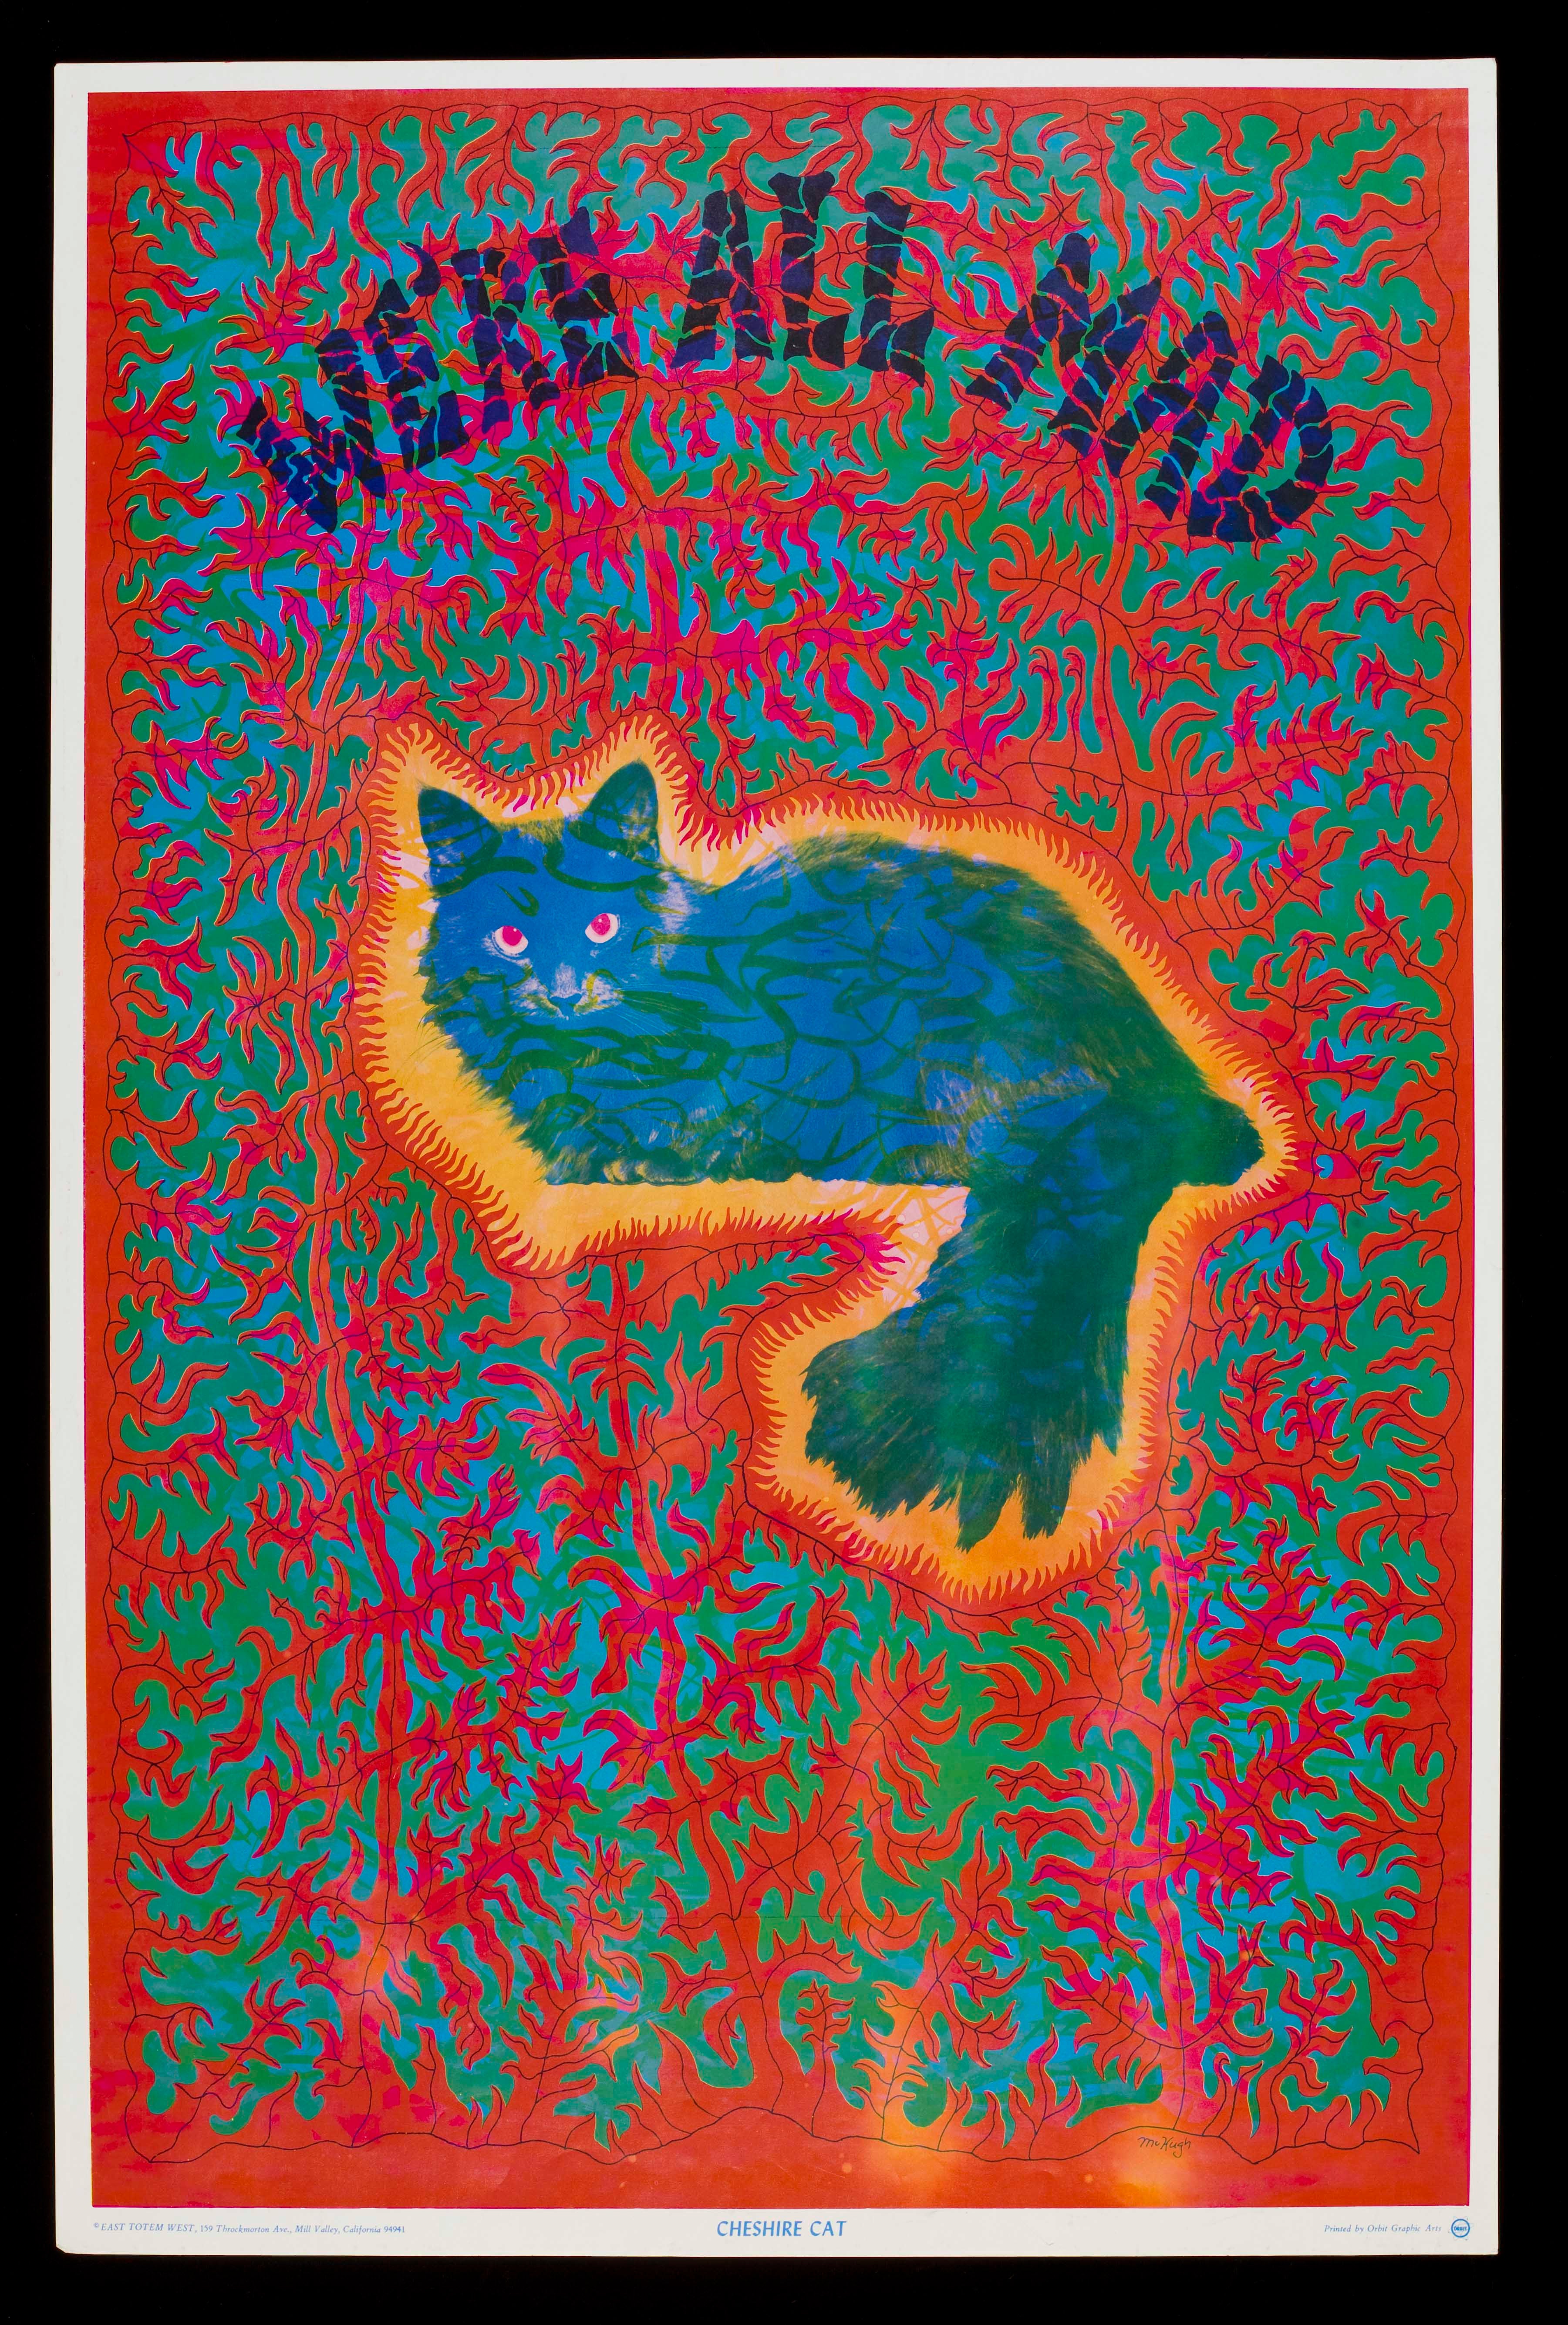 ‘Cheshire cat’, psychedelic poster by Joseph McHugh, published by East Totem West, USA, 1967